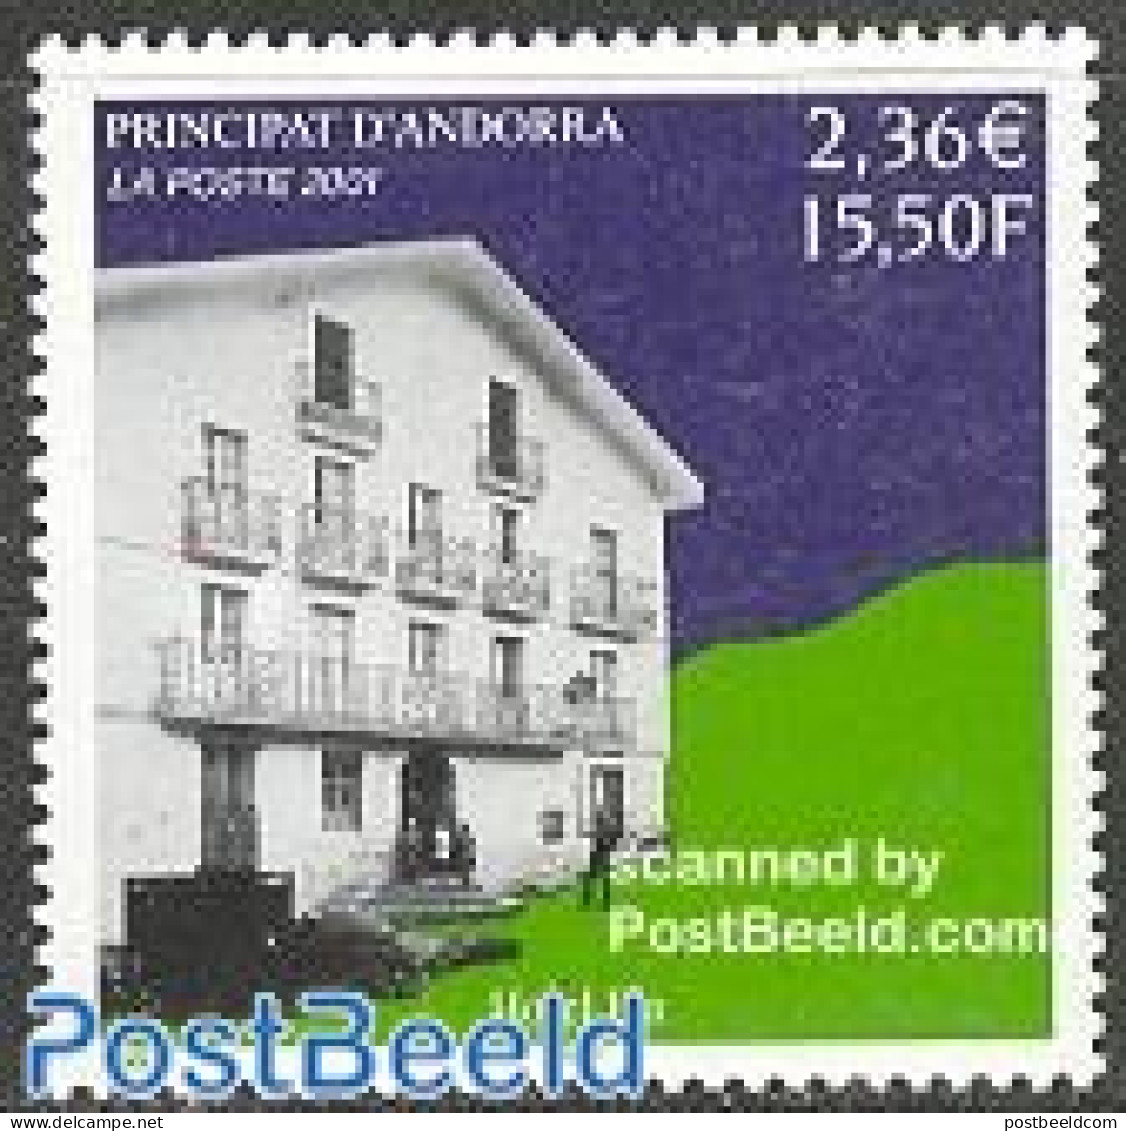 Andorra, French Post 2001 Hotel Pla 1v, Mint NH, Various - Hotels - Tourism - Art - Architecture - Unused Stamps